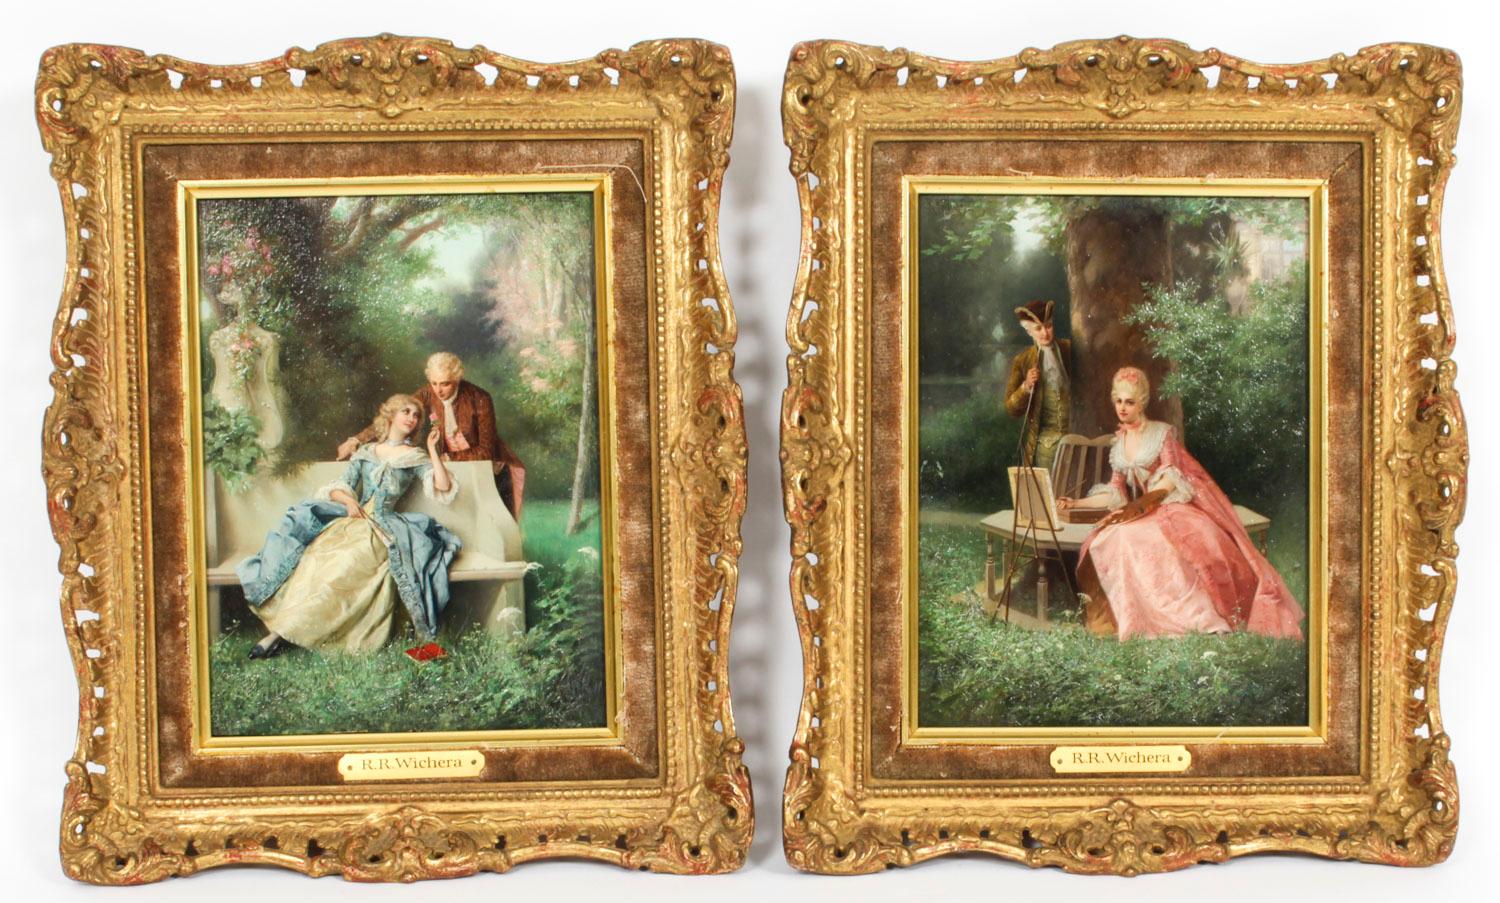 Antique Pair of Oil on Canvas Courtiers Paintings by Raimund Von Wichera 19th C 7